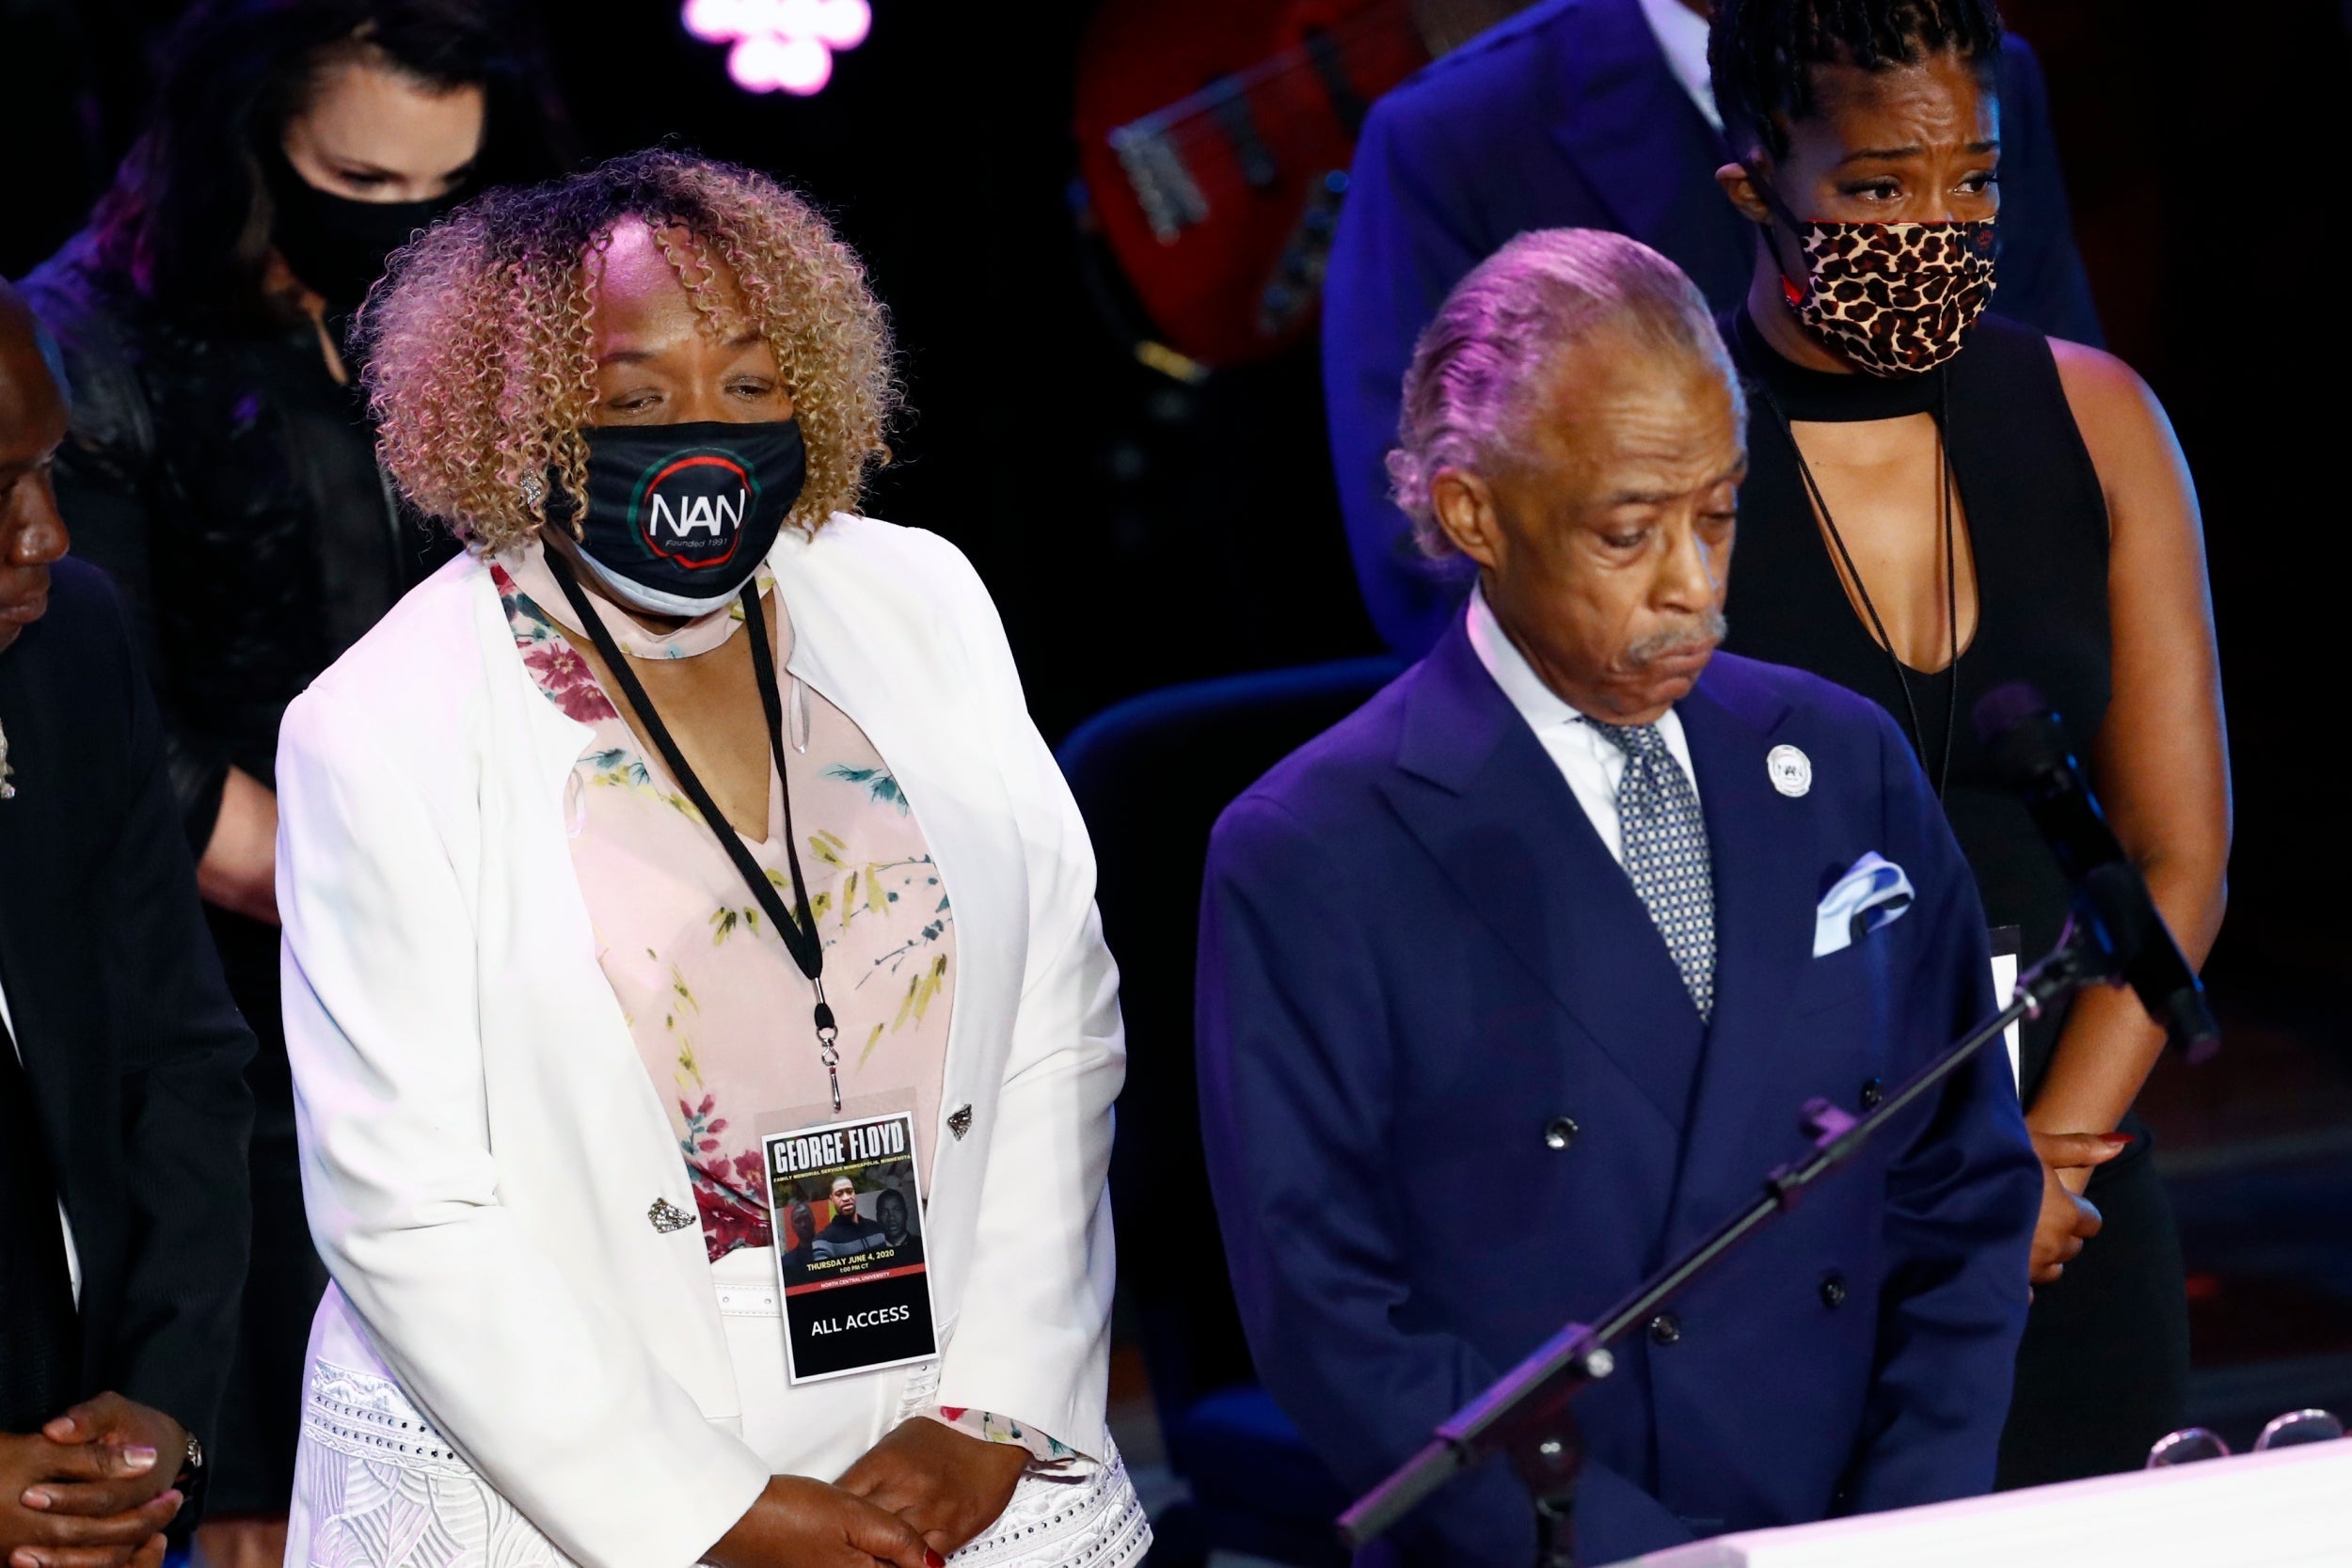 The Rev Al Sharpton at a memorial to George Floyd at North Central University in Minneapolis, flanked by Gwen Carr (left), the mother of Eric Garner, who was killed by police in New York City in 2014, and Tiffany Haddish (right)